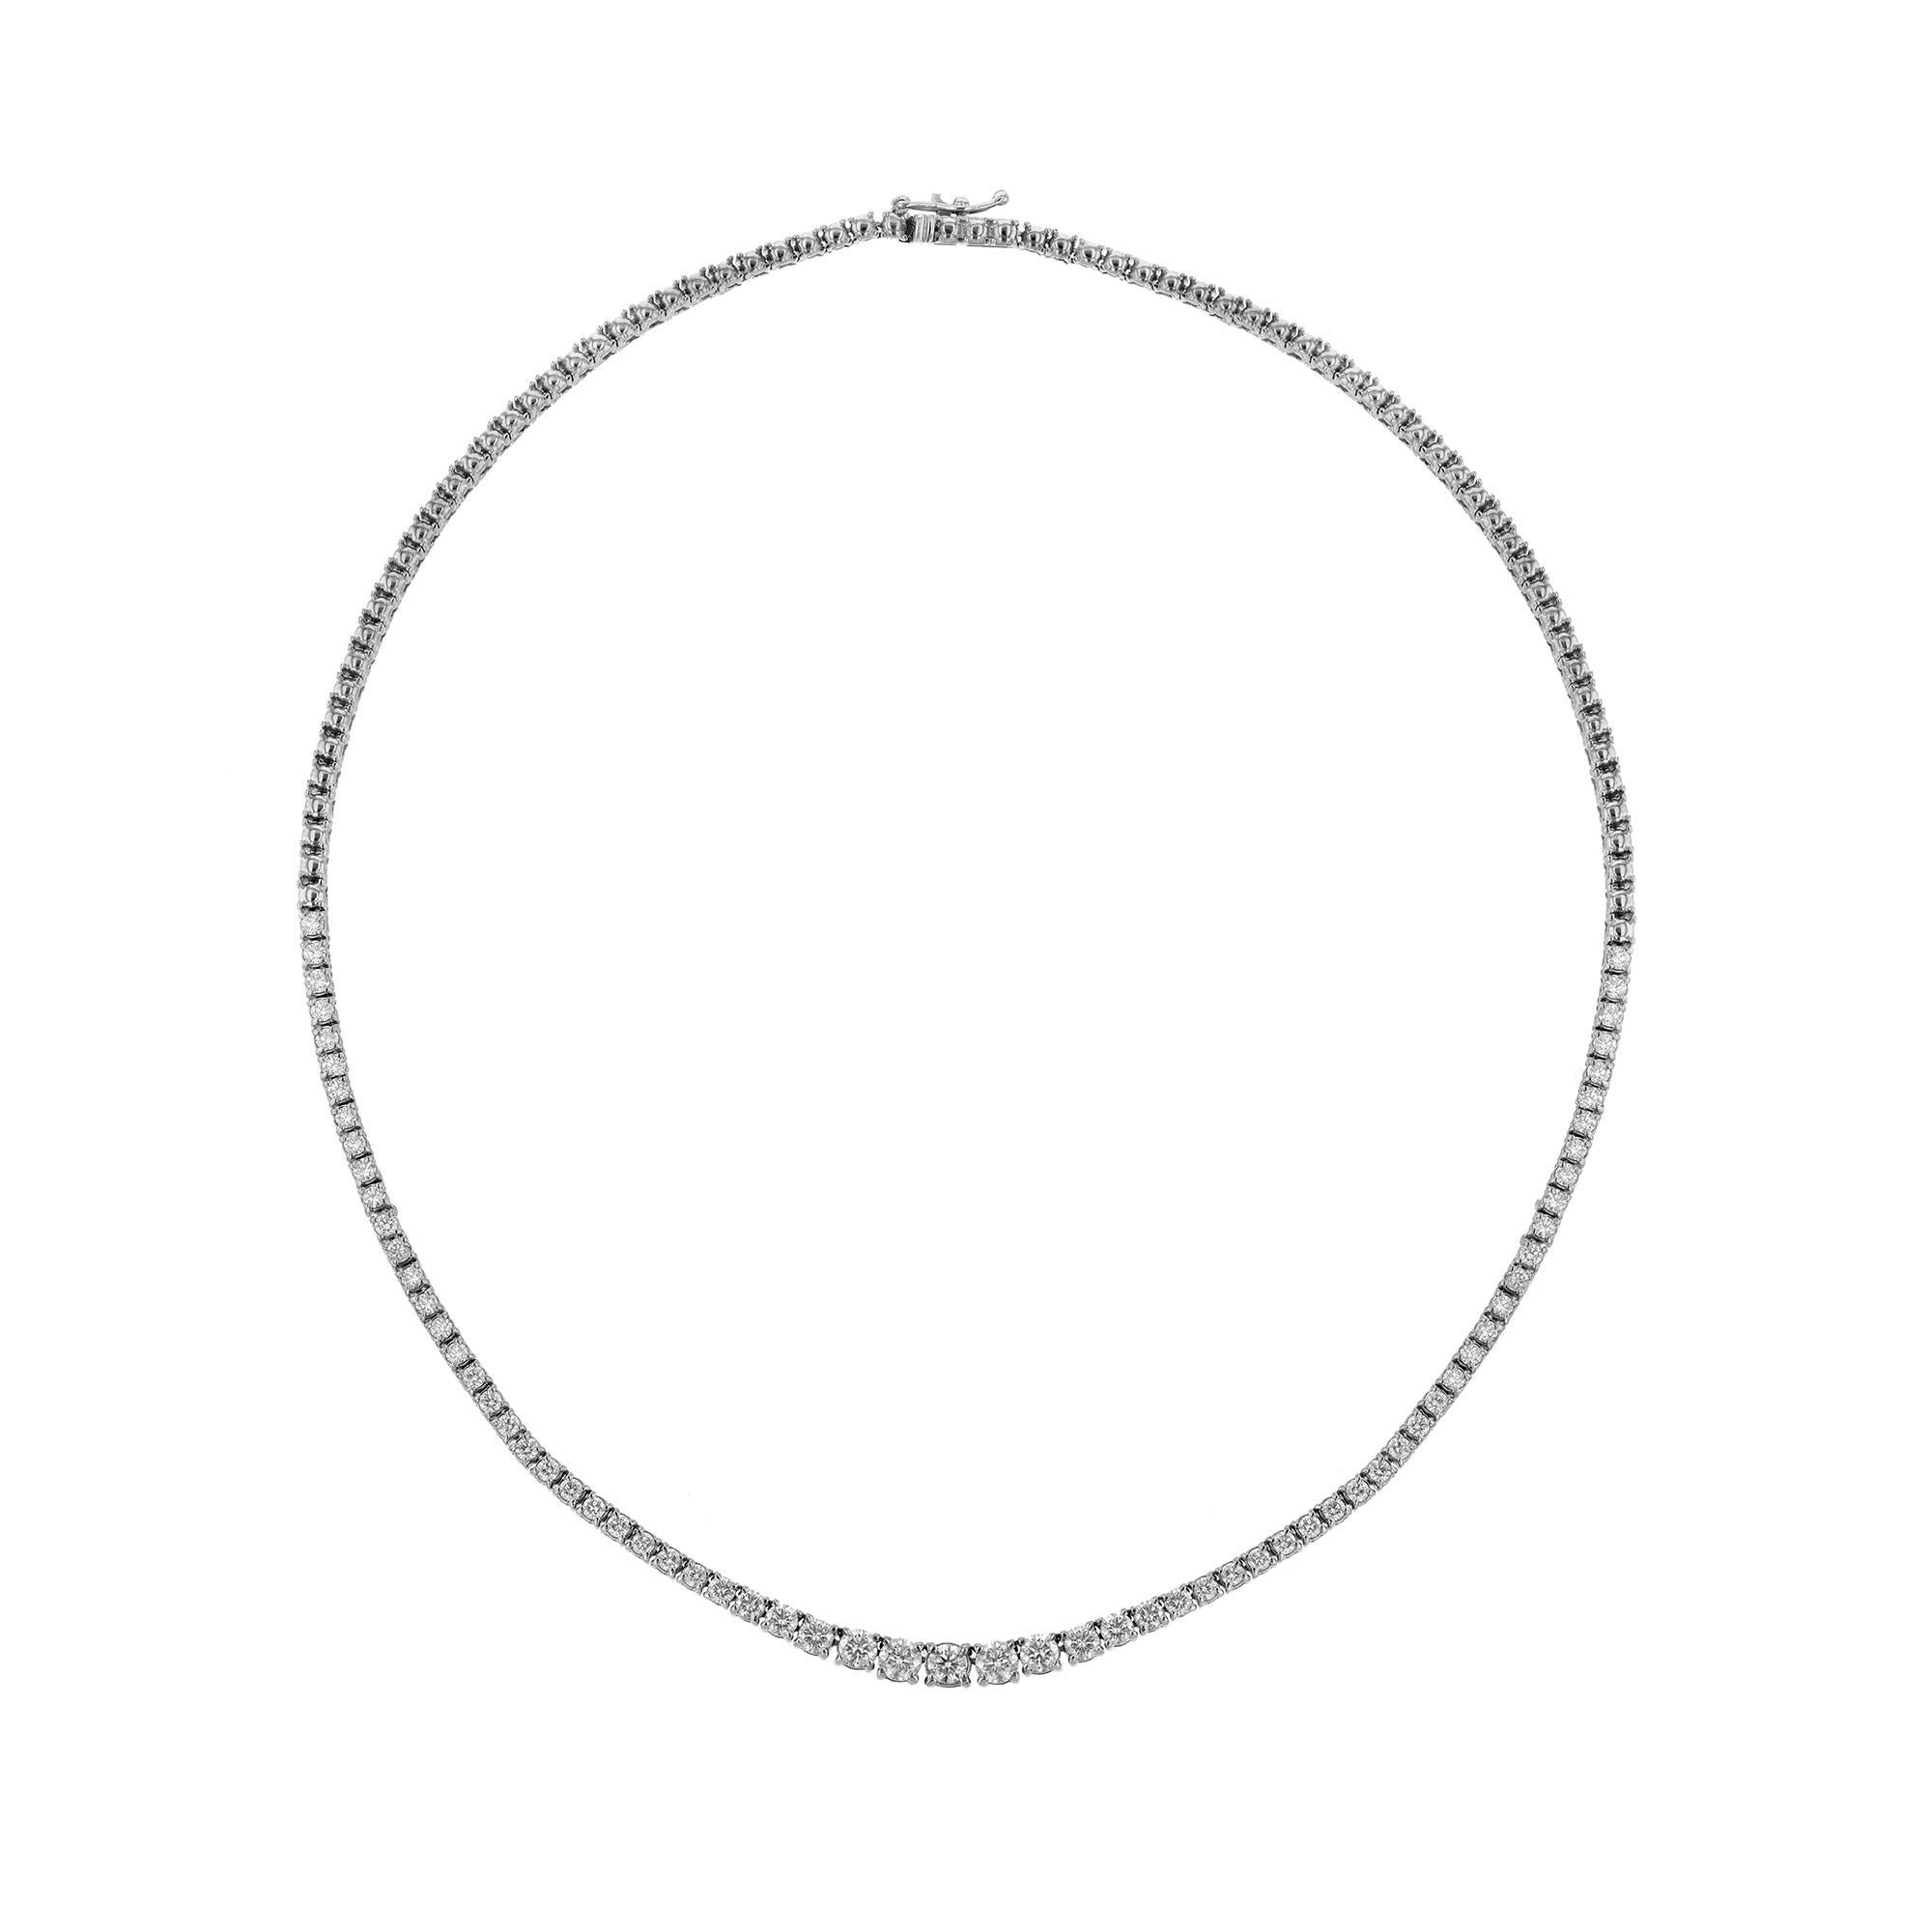 This paperclip necklace is made in 18K white gold. It features 81 round cut diamonds weighing 6.77 carats combined. Necklace has a color grade (G) and (H) and clarity grade (SI1) and (VS). The necklace has diamonds all around with white gold